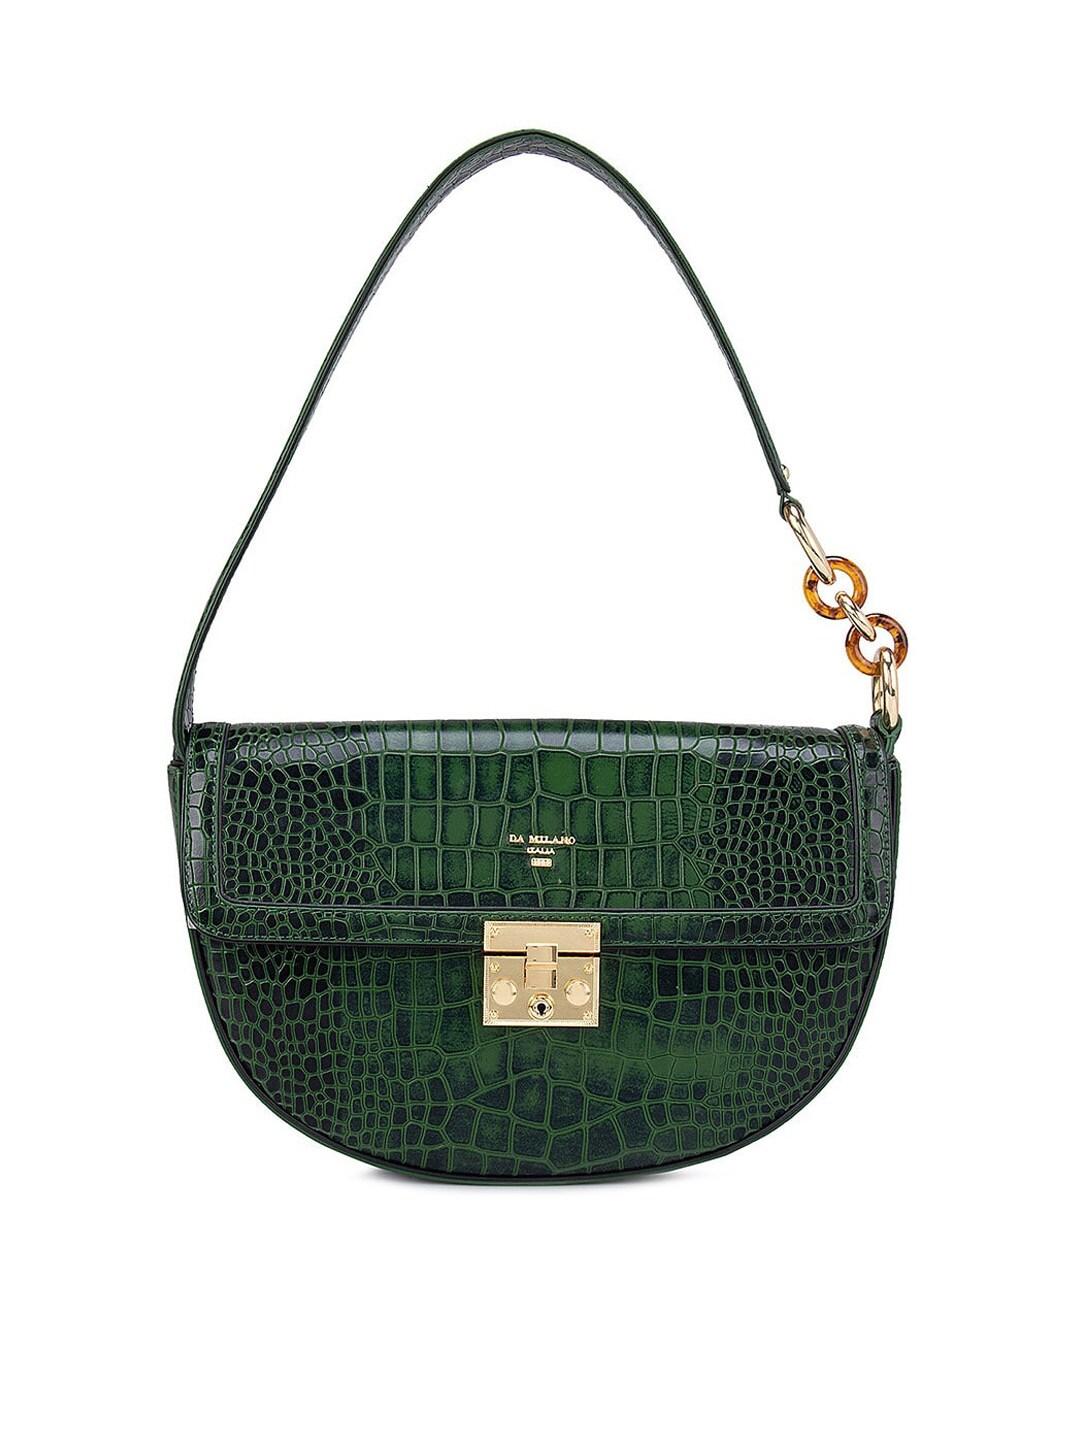 Da Milano Textured Leather Half Moon Sling Bag with Cut Work